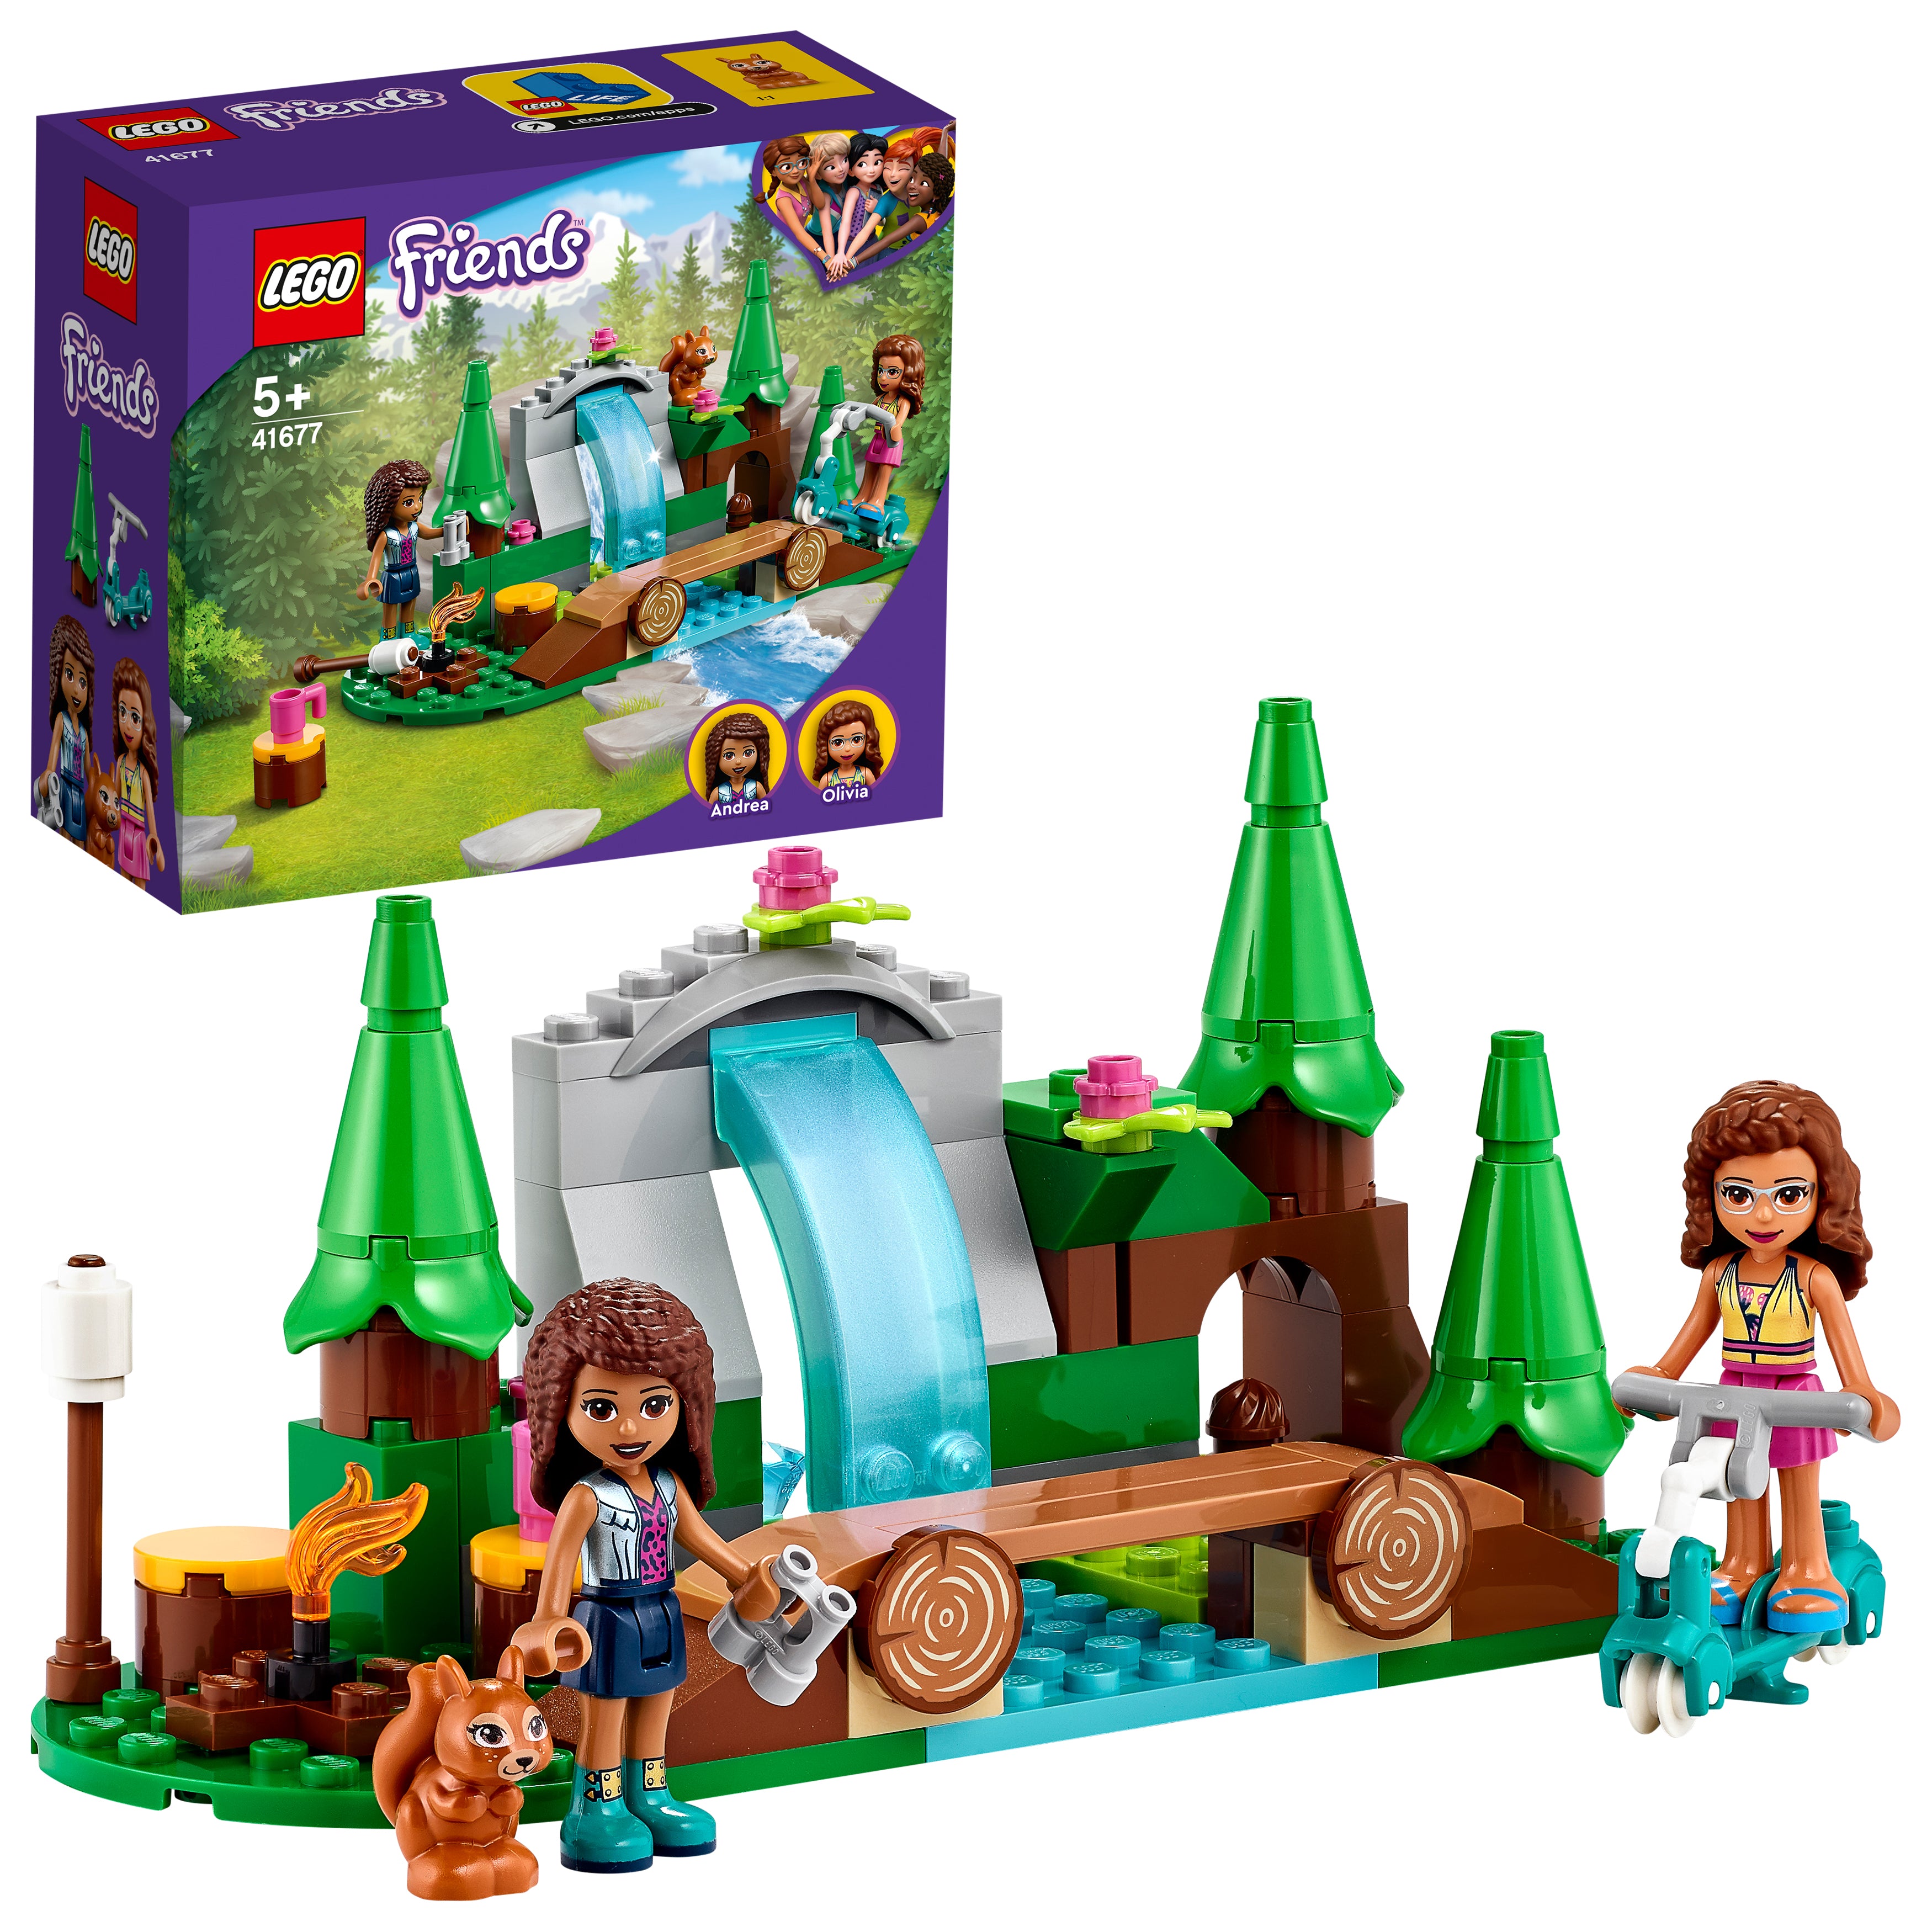 Lego 41677 Forest Waterfall